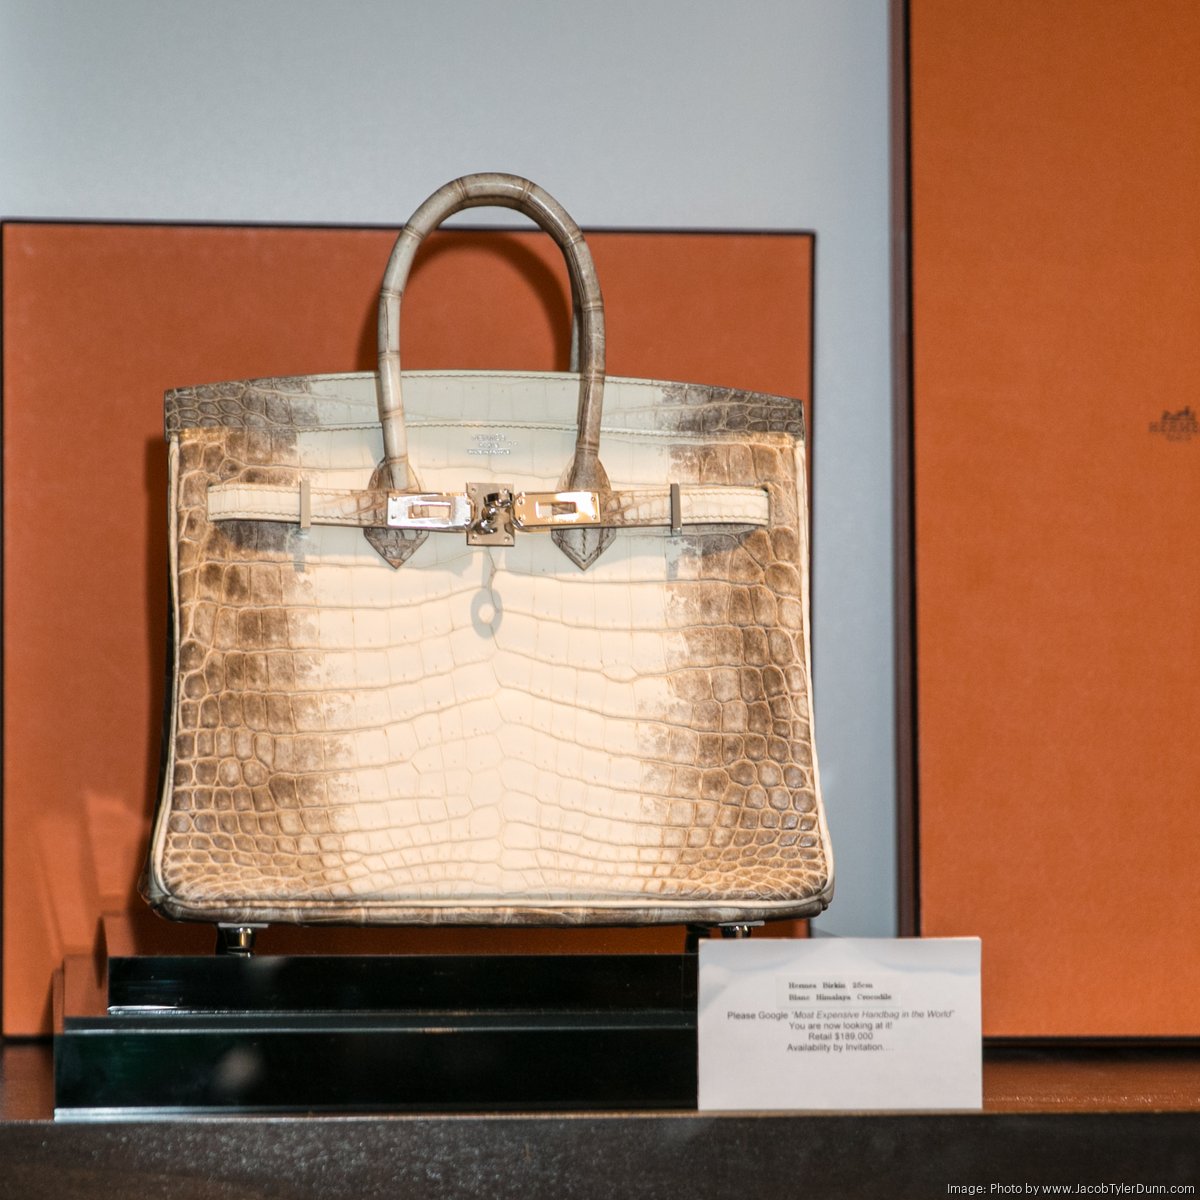 The Most Expensive Birkin Bags on the Internet